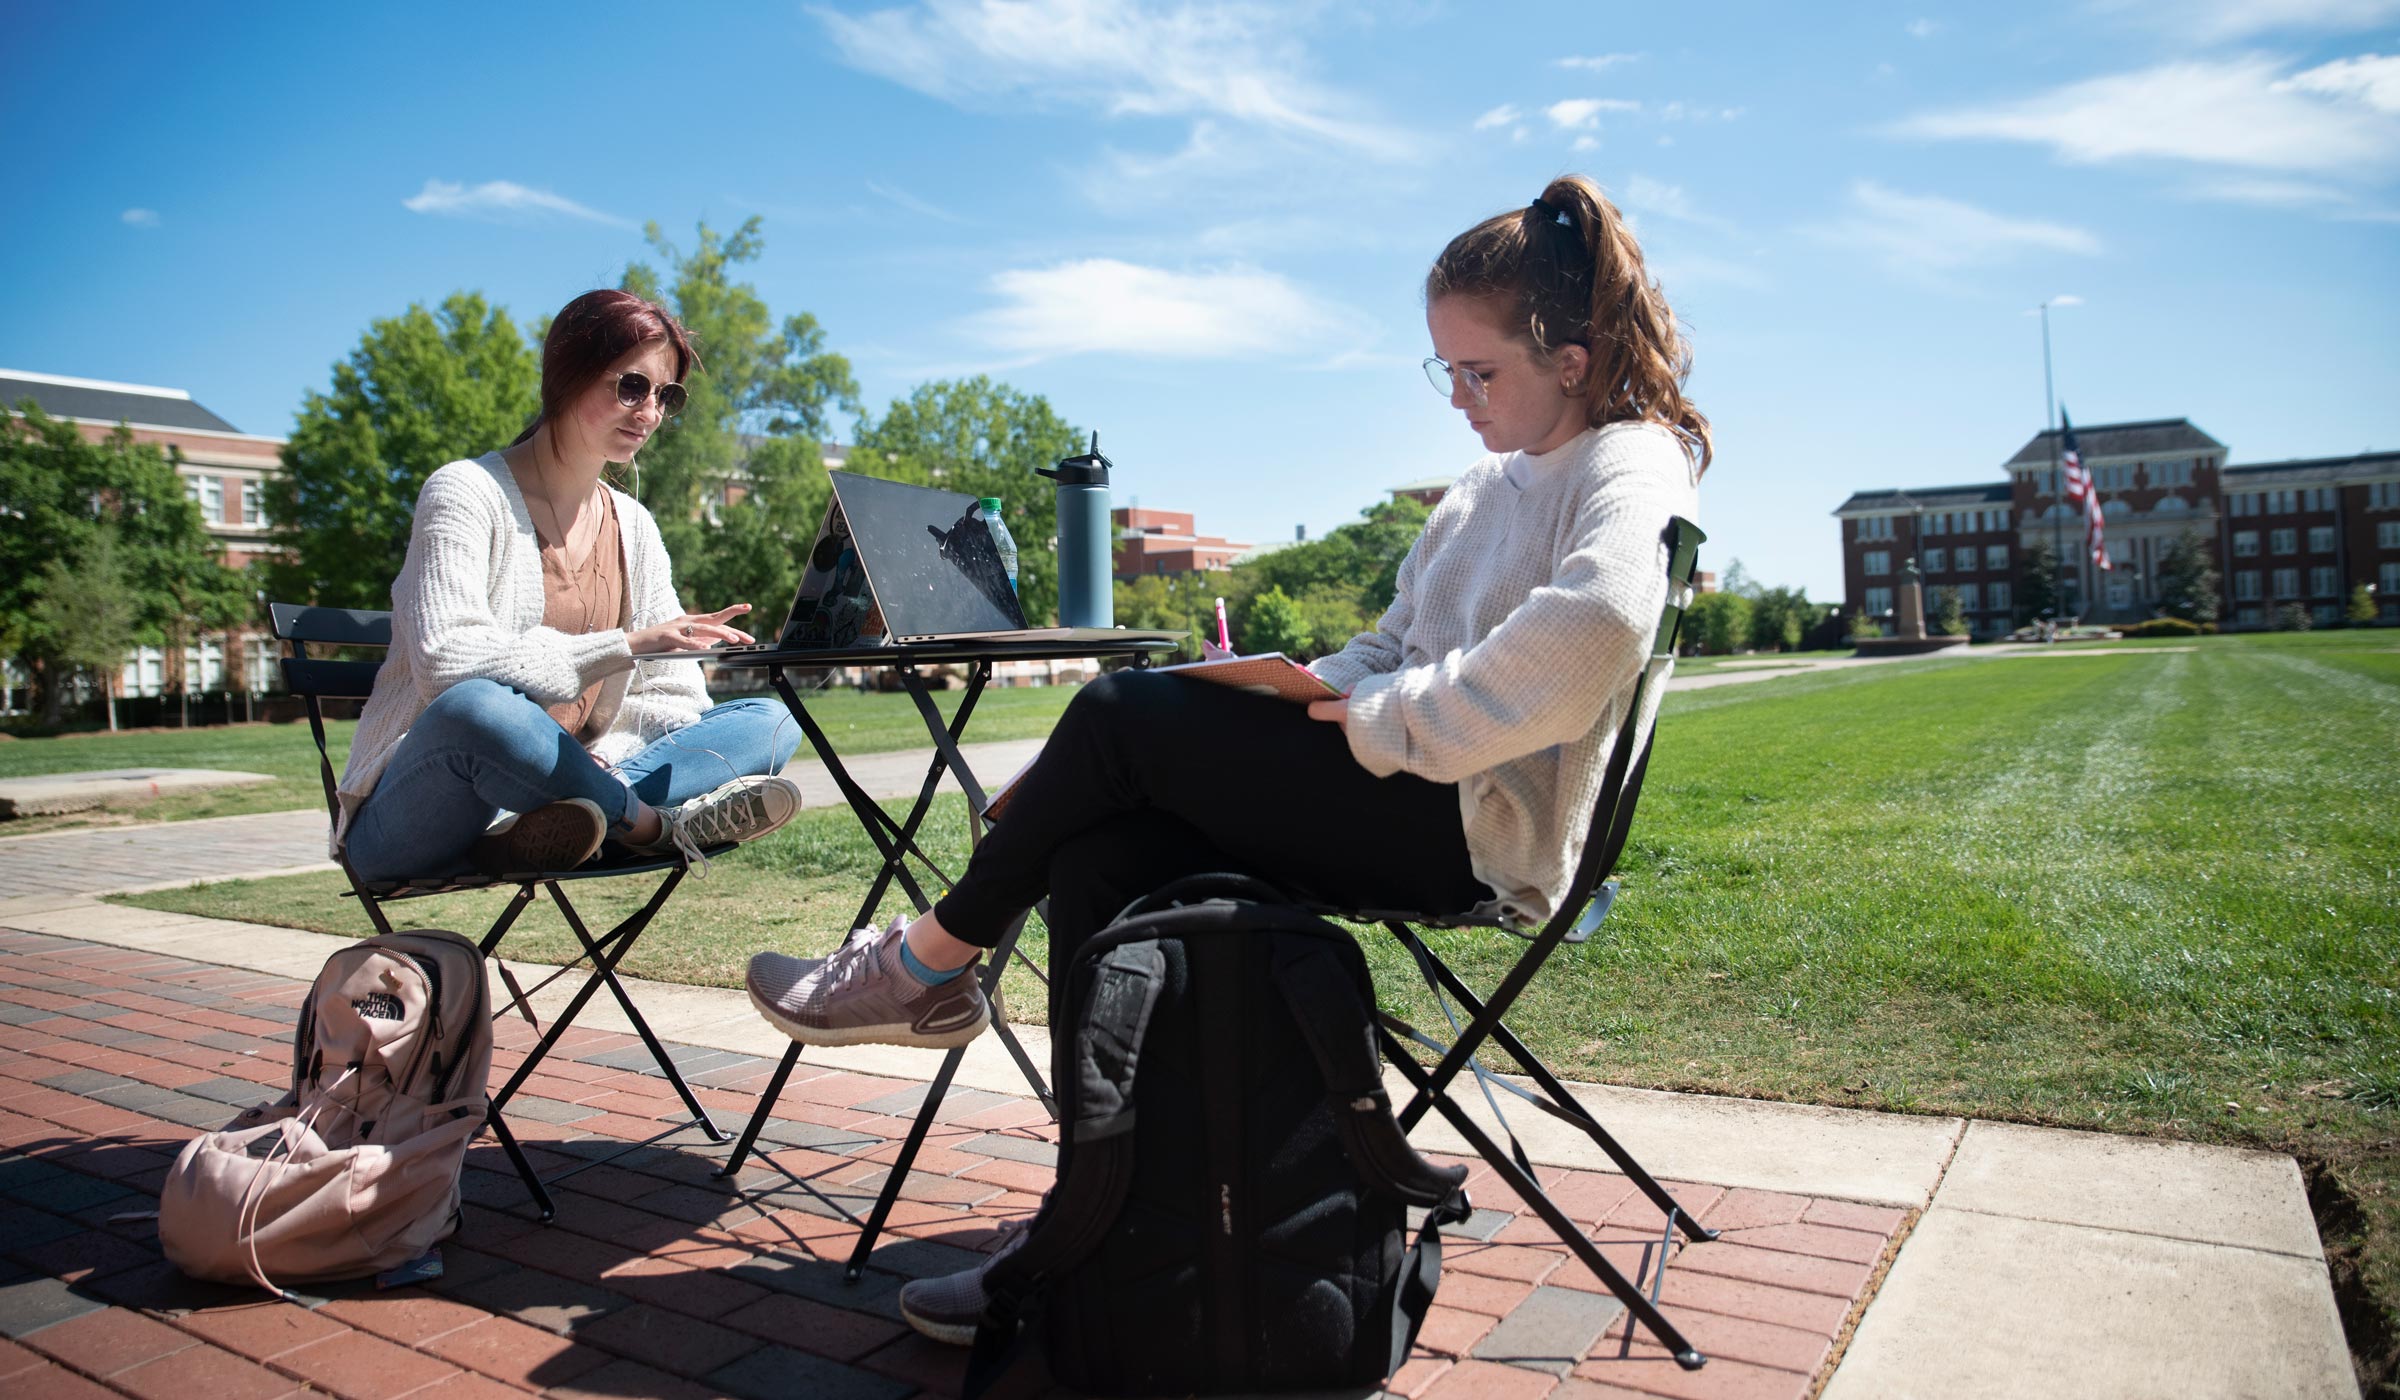 Students Erin Robbins and Maggie Moore studying outside before finals week.